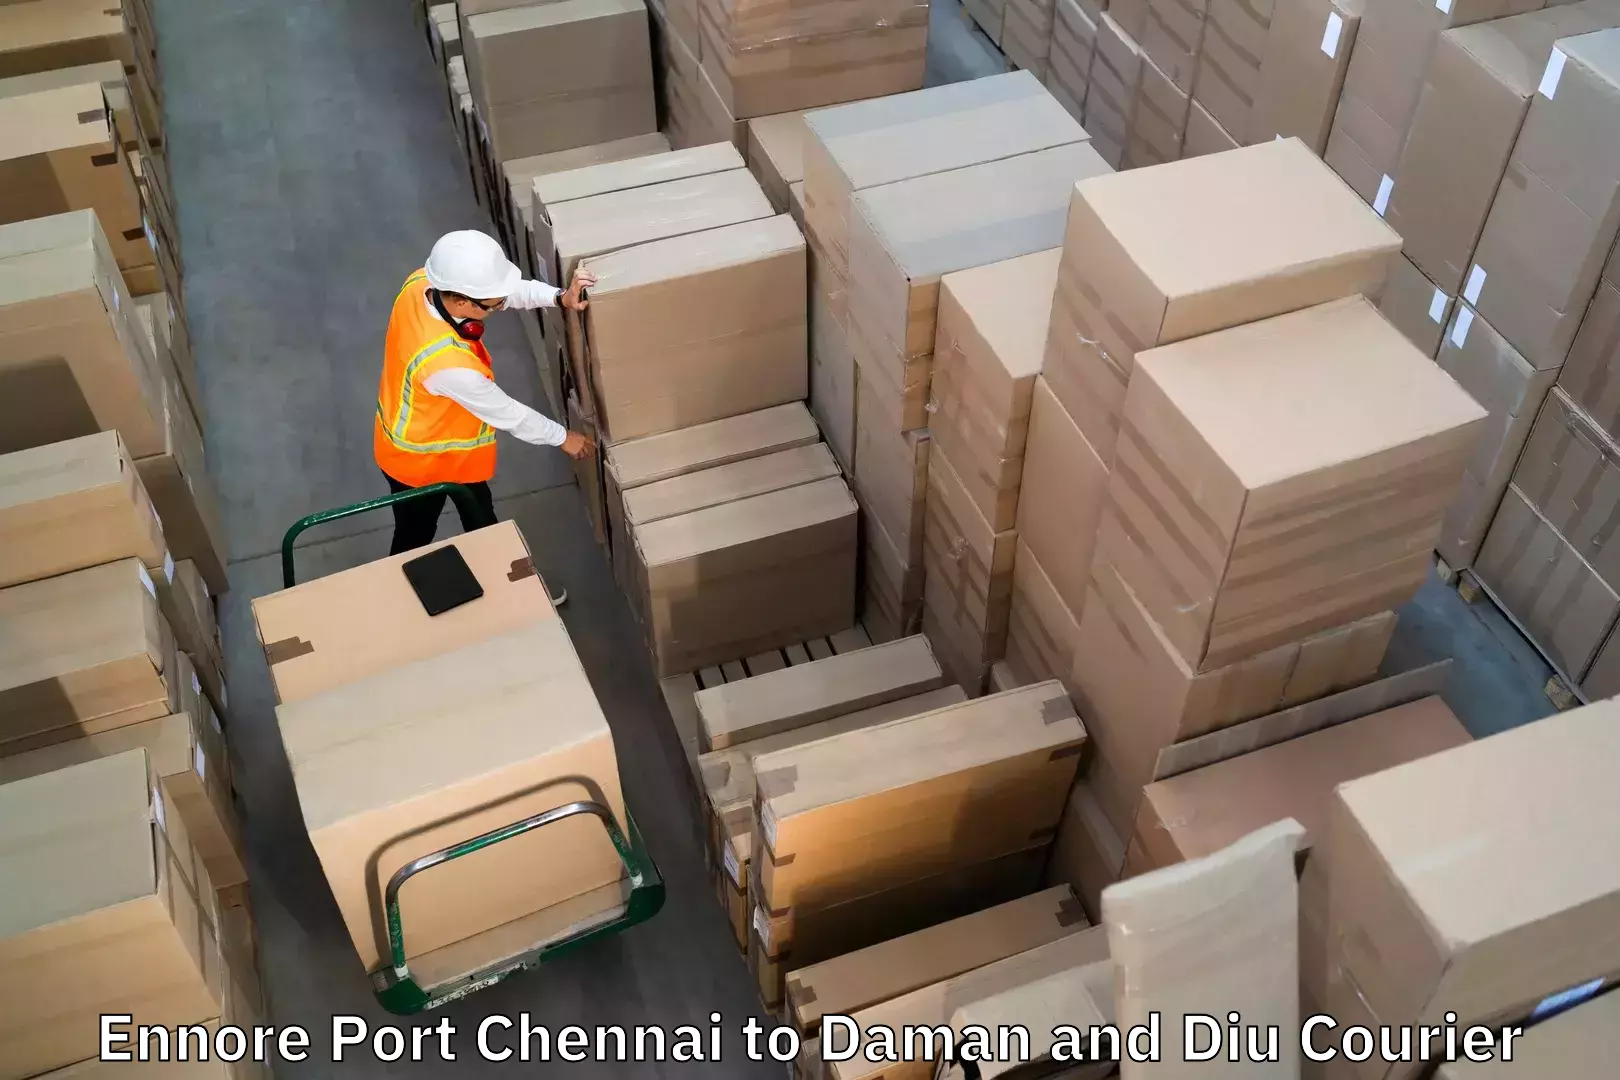 Luggage shipment processing in Ennore Port Chennai to Daman and Diu